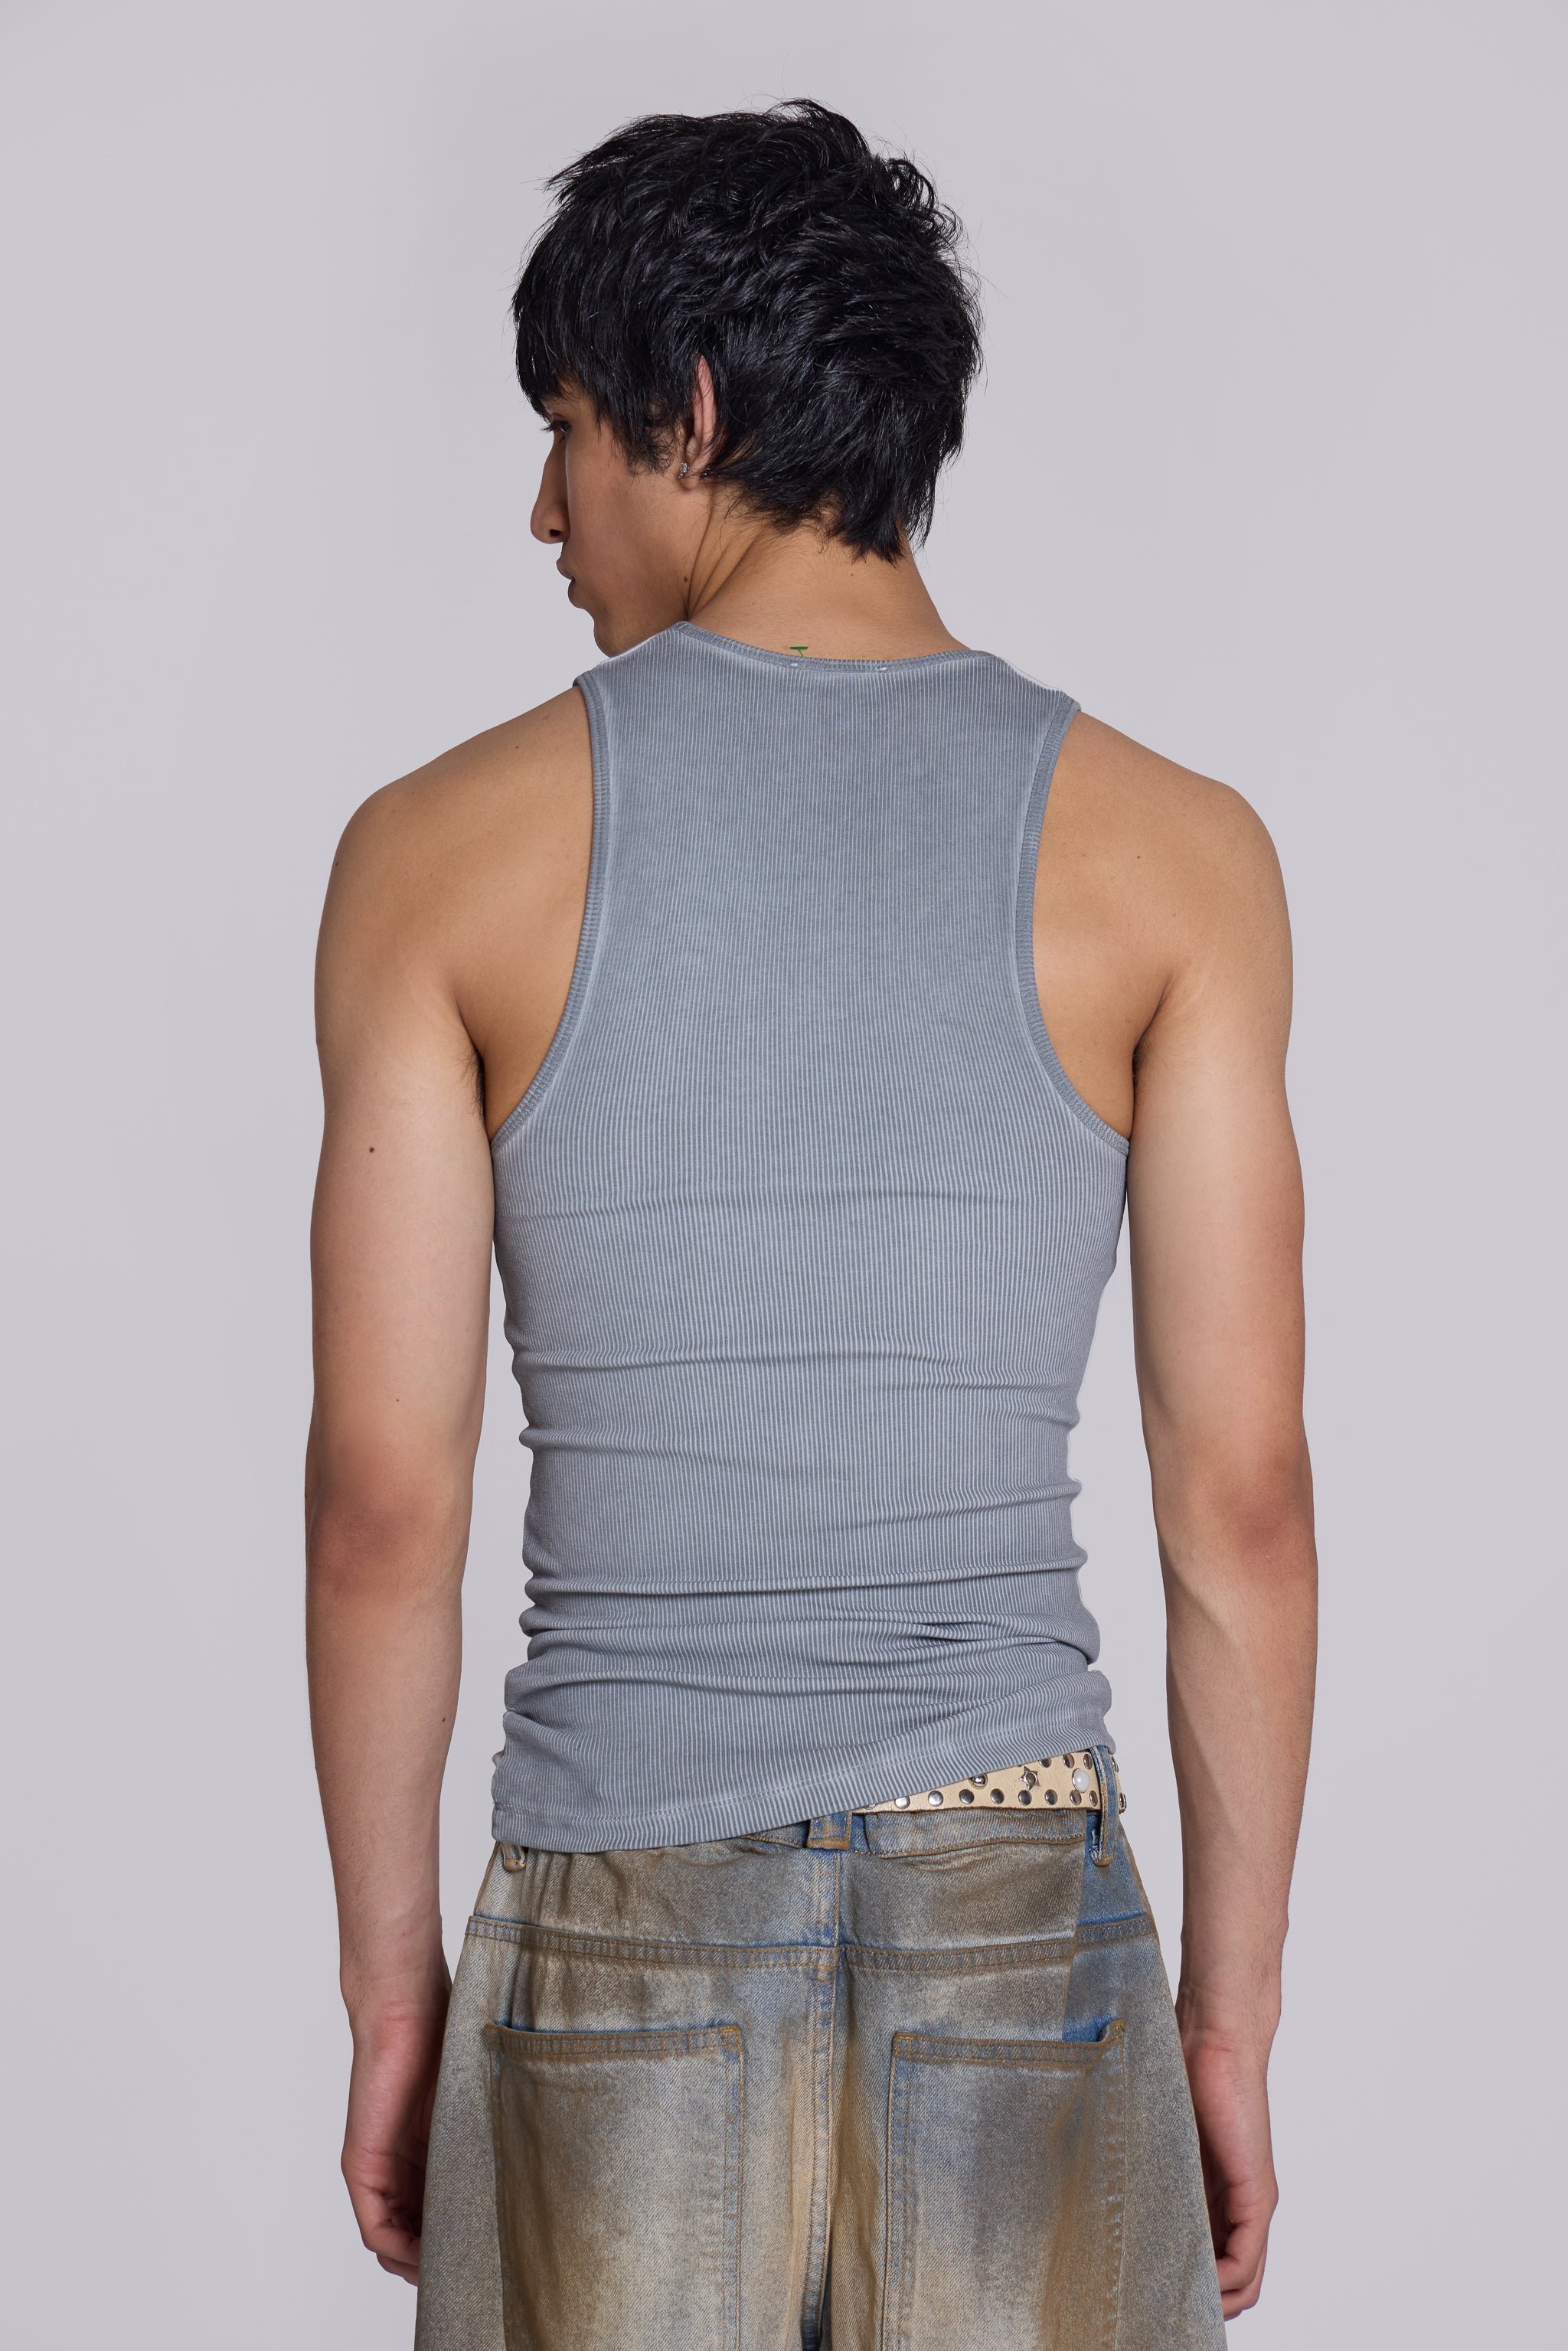 Gifted Vest